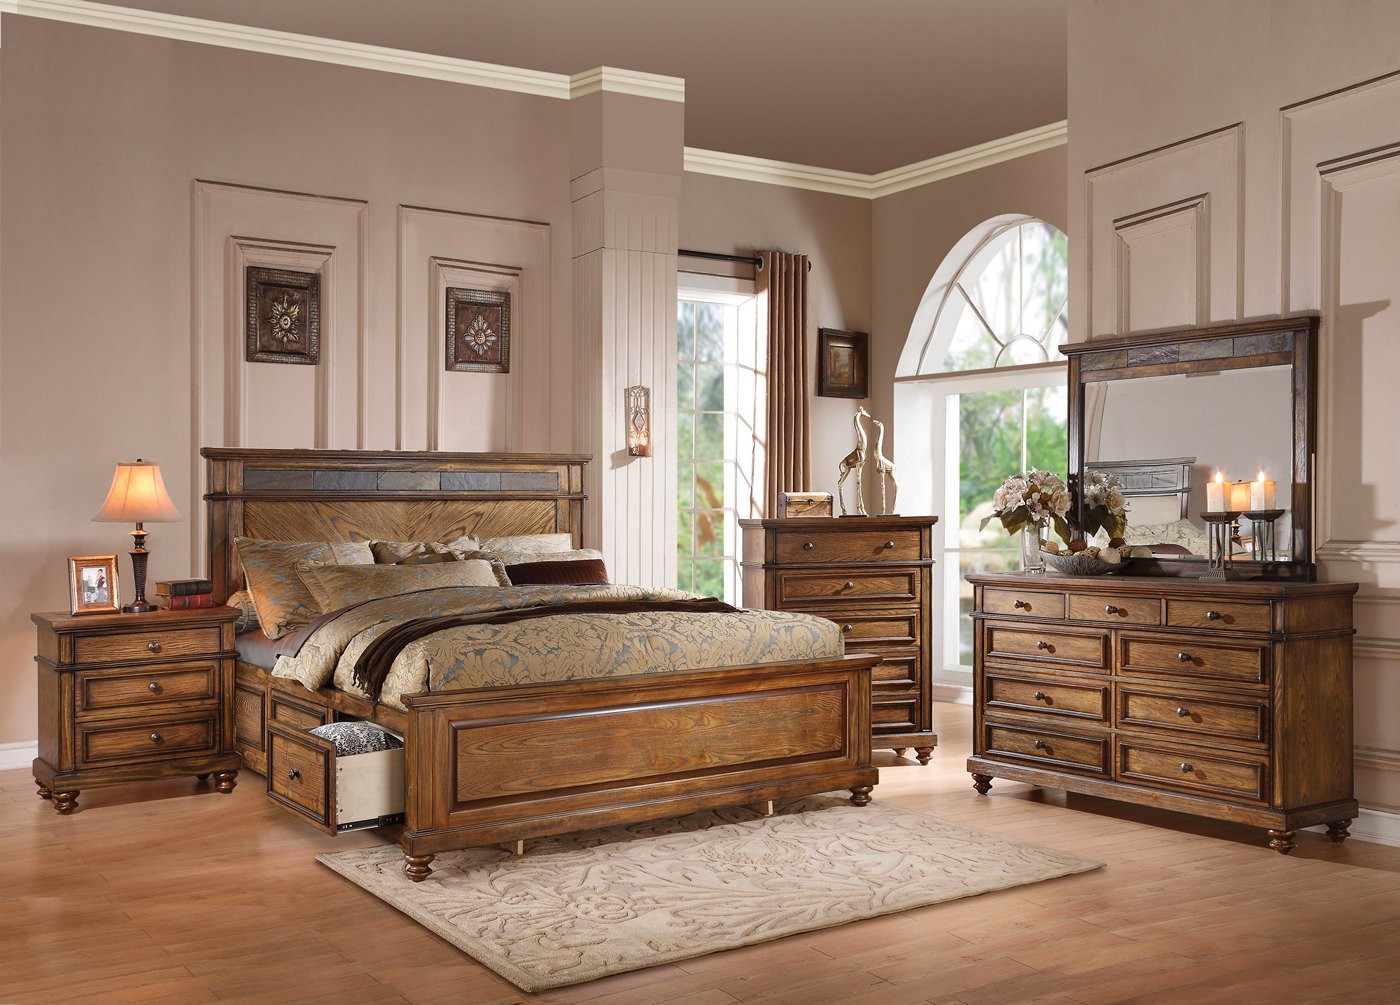 Rustic King Bedroom Sets
 Abilene Rustic 4 pc King Storage Bed Set with Stone Accent